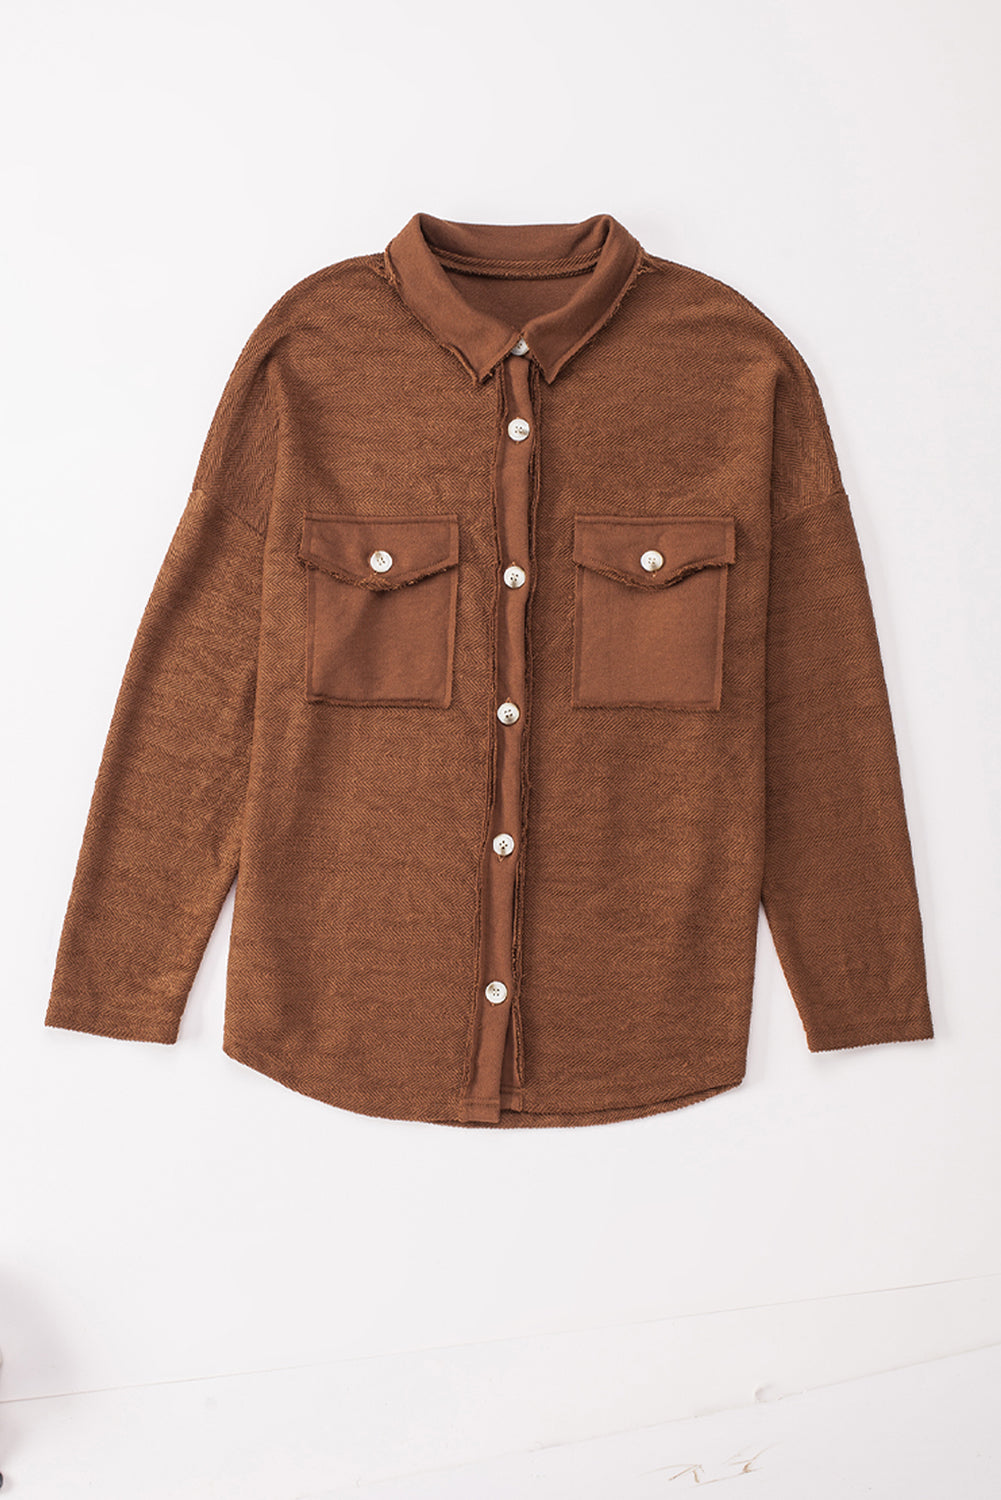 Cali Chic Brown Contrast Flap Pockets Relaxed Shacket